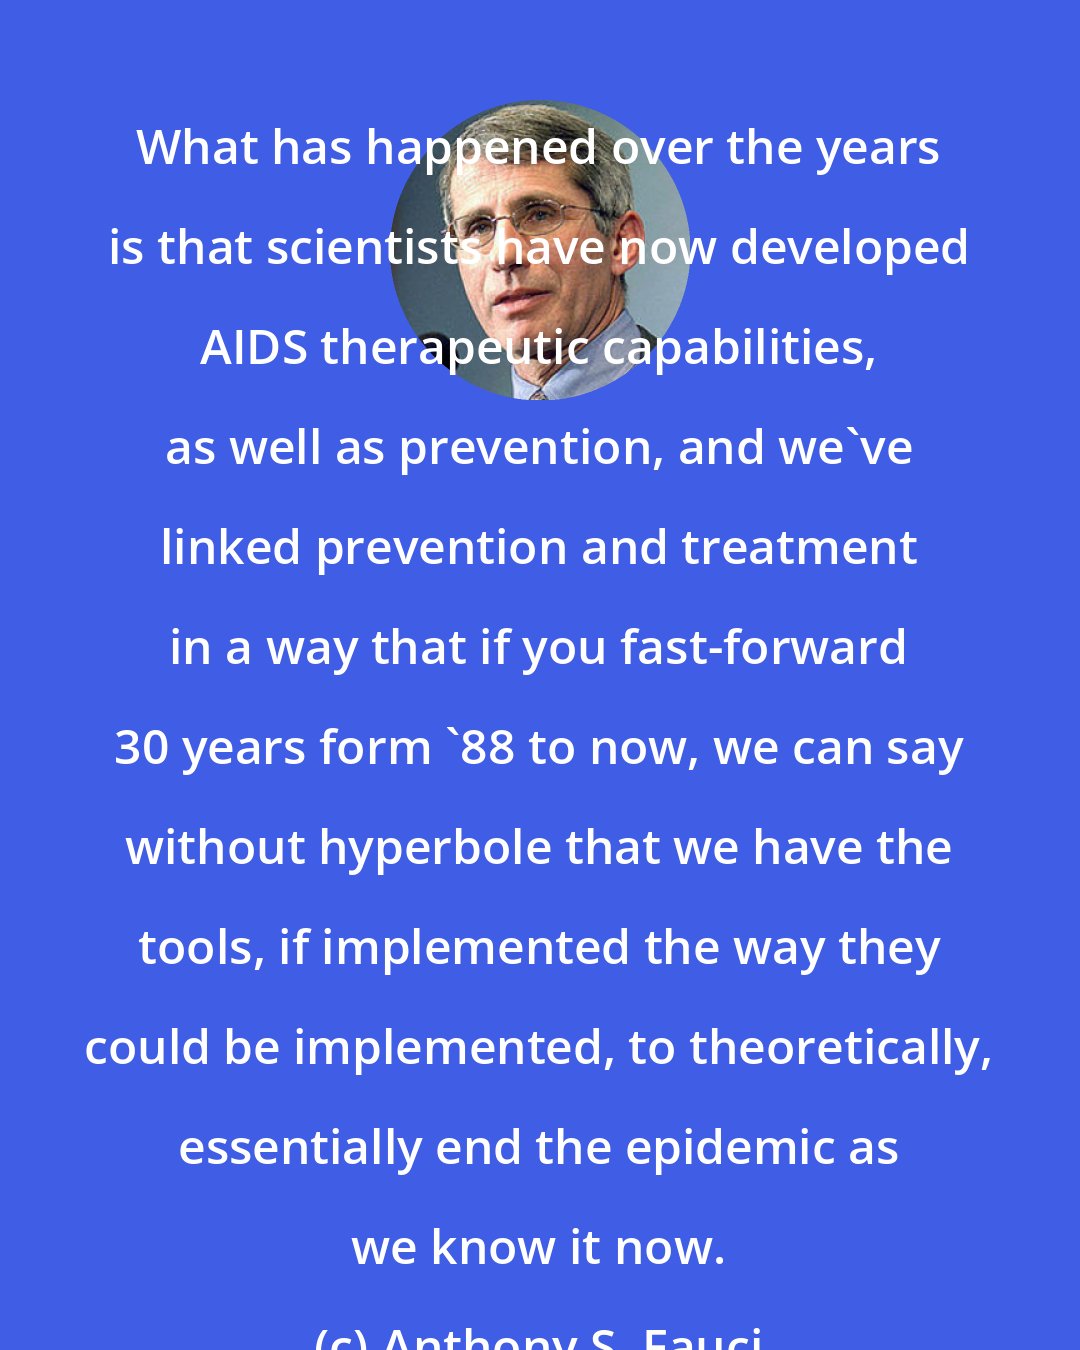 Anthony S. Fauci: What has happened over the years is that scientists have now developed AIDS therapeutic capabilities, as well as prevention, and we've linked prevention and treatment in a way that if you fast-forward 30 years form '88 to now, we can say without hyperbole that we have the tools, if implemented the way they could be implemented, to theoretically, essentially end the epidemic as we know it now.